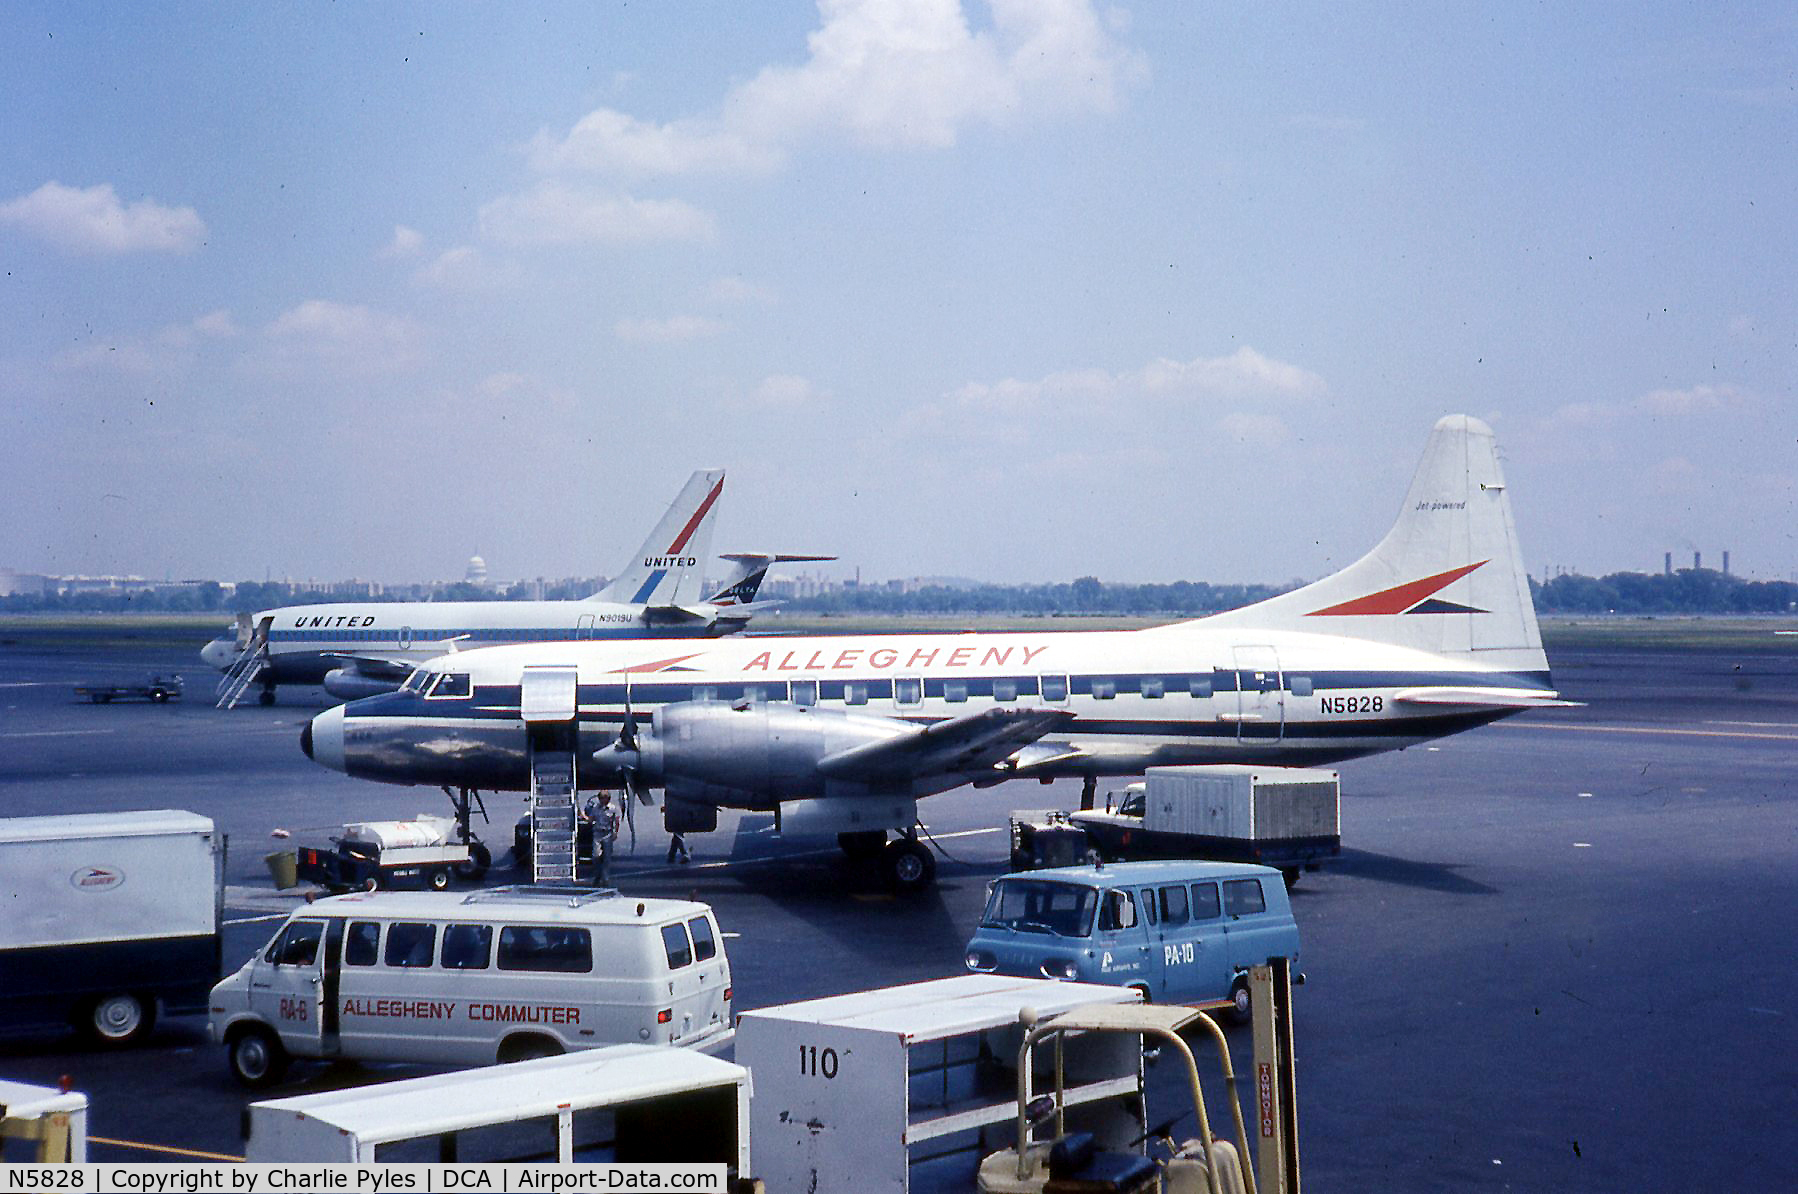 N5828, 1956 Convair 580 C/N 375, Not a freighter yet in this photo